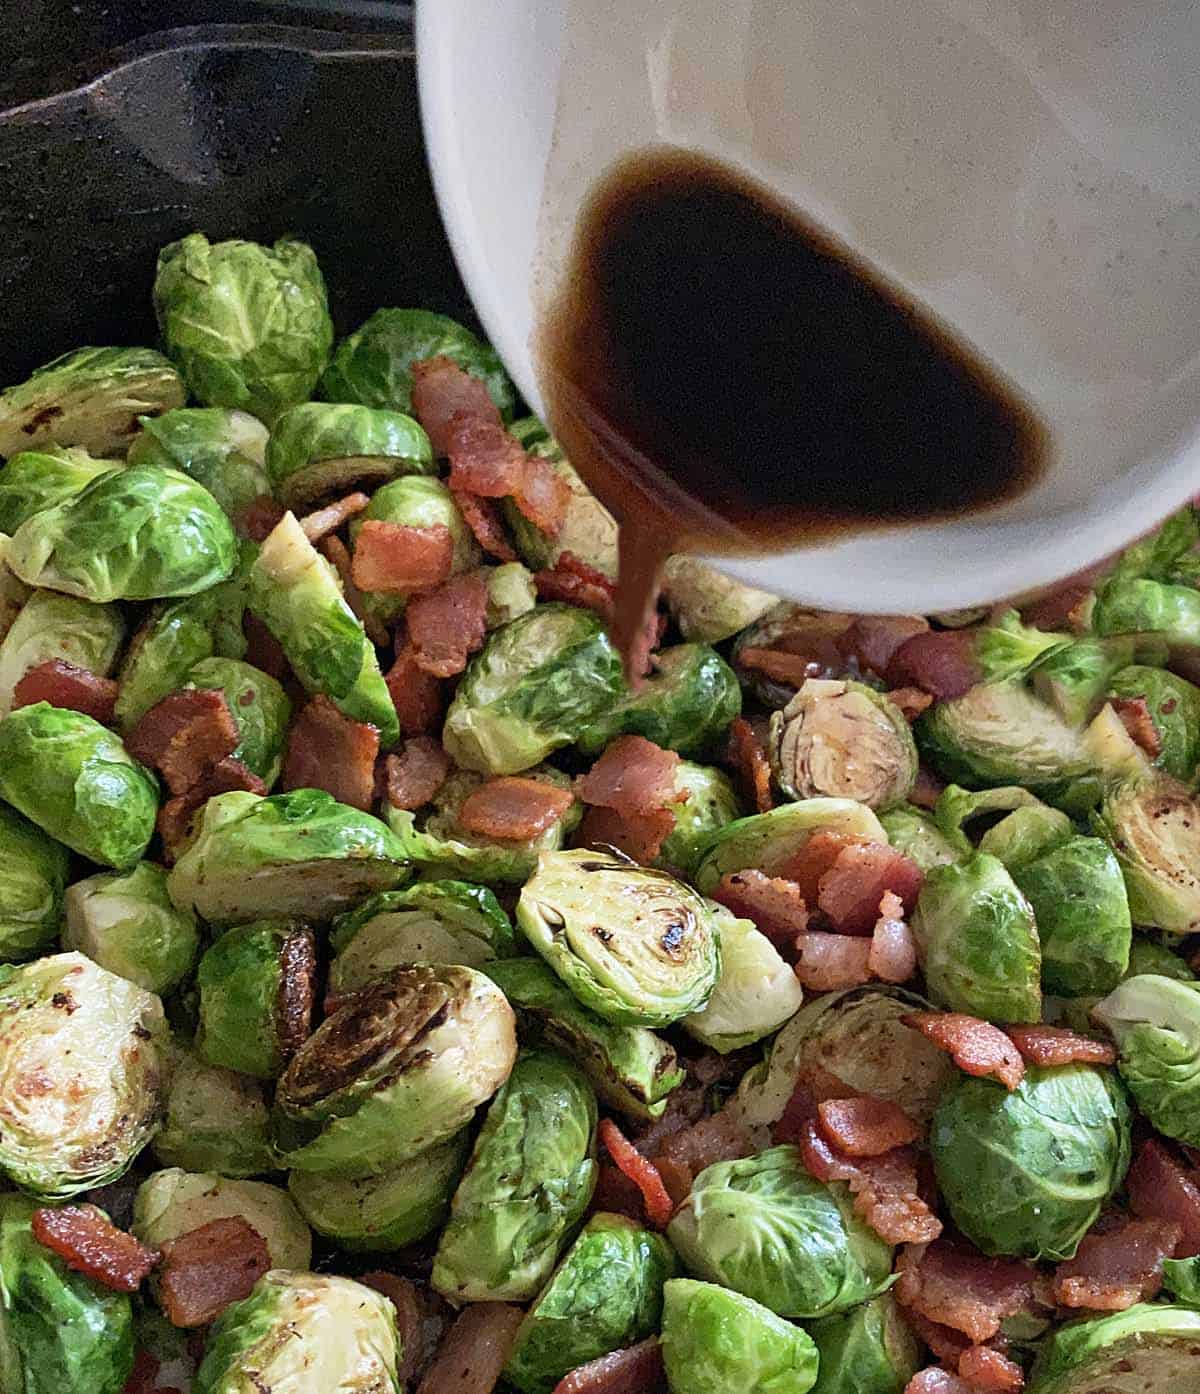 A close up of a small white dish of balsamic vinegar being drizzled over Brussel sprouts with bacon